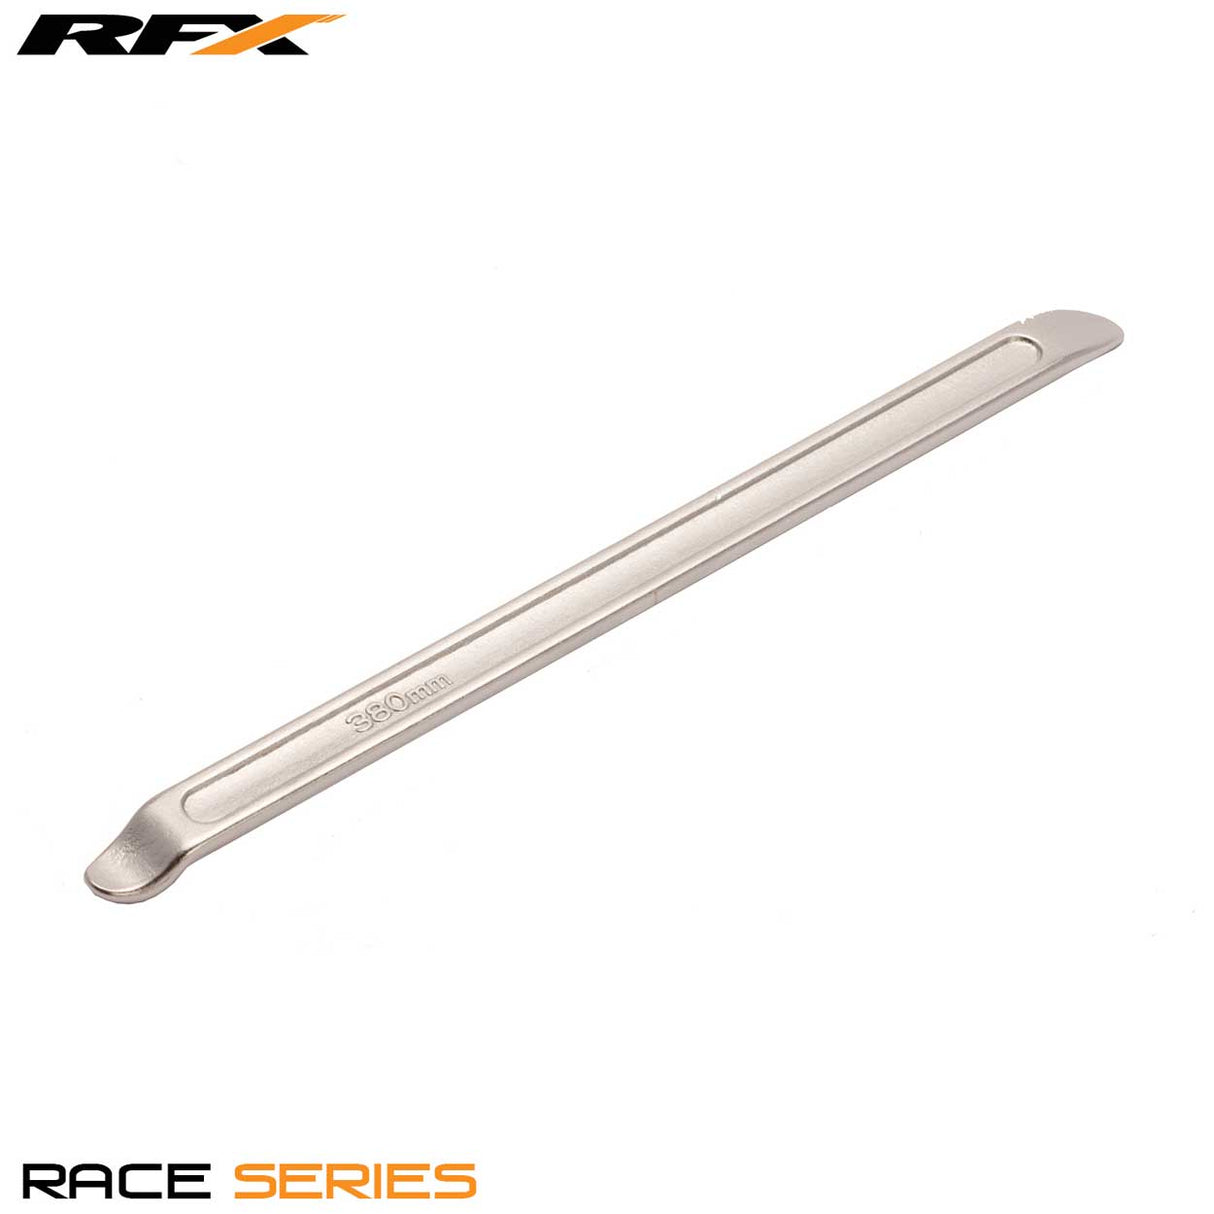 RFX Race Dual Spoon end Tyre Lever Universal 240mm / 9.5in Long